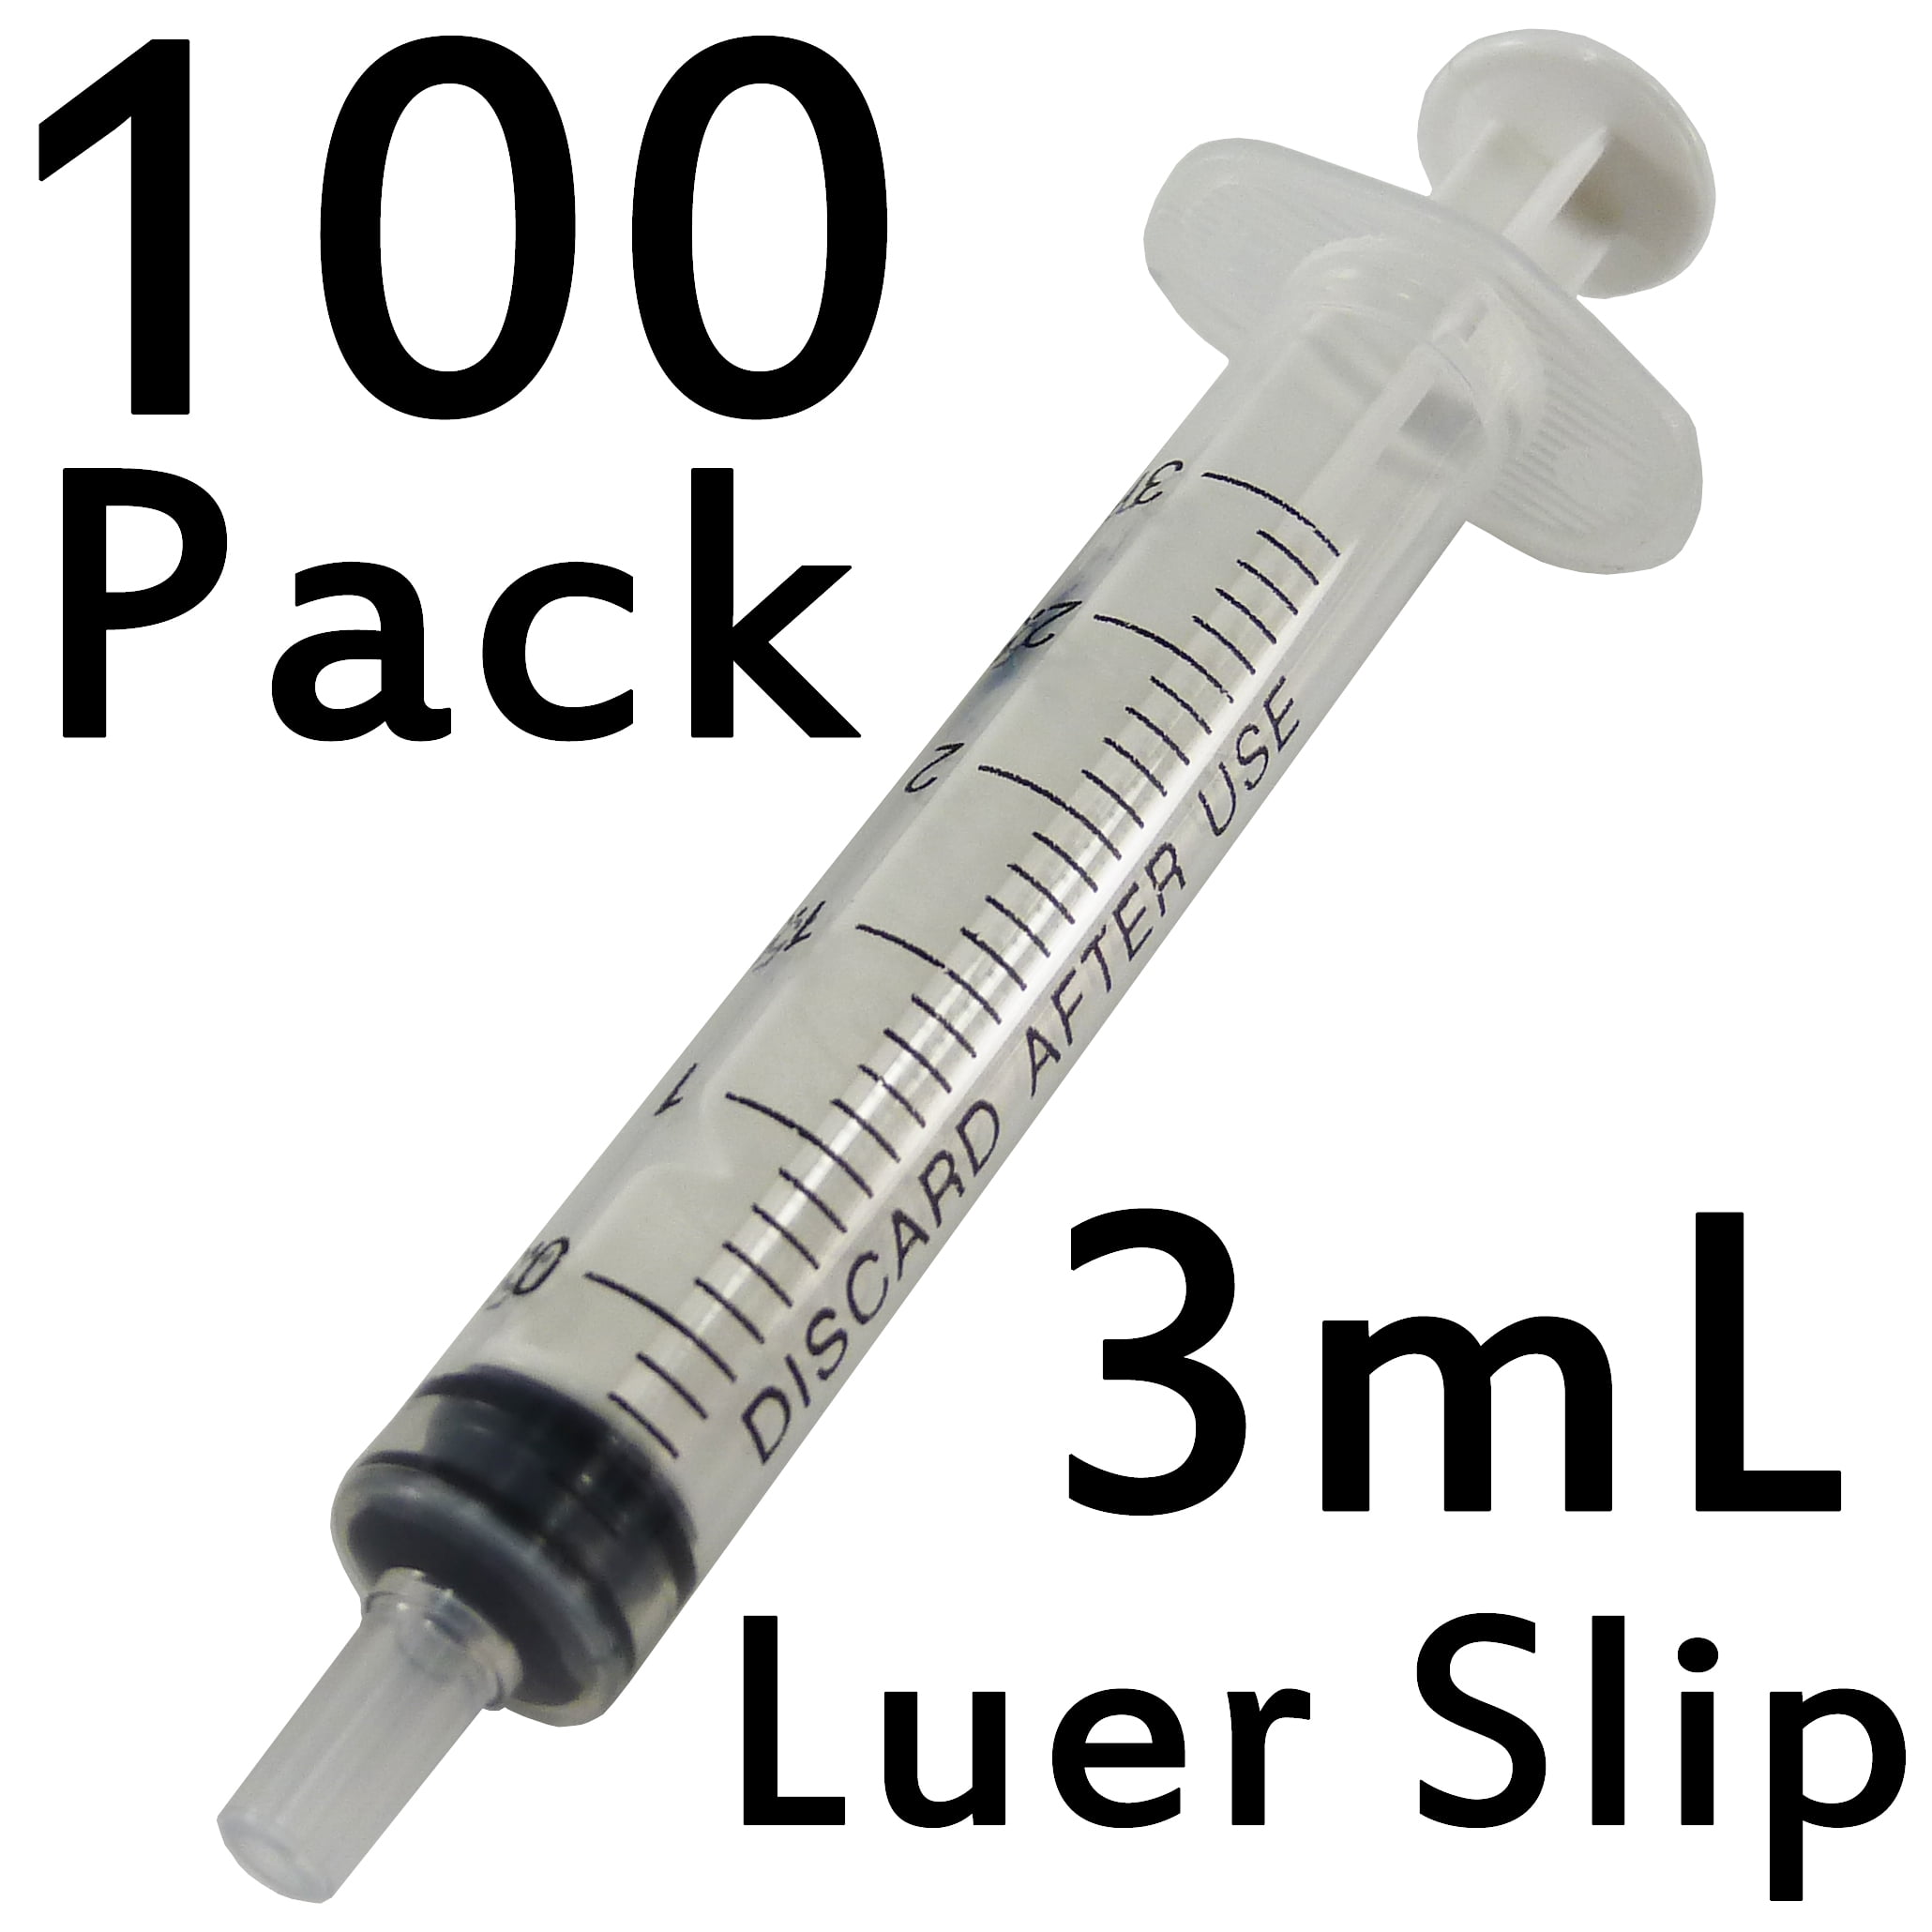 1ml Tb Luer Slip Tip Syringes Without Needles Pack Of 100 Walmart Com